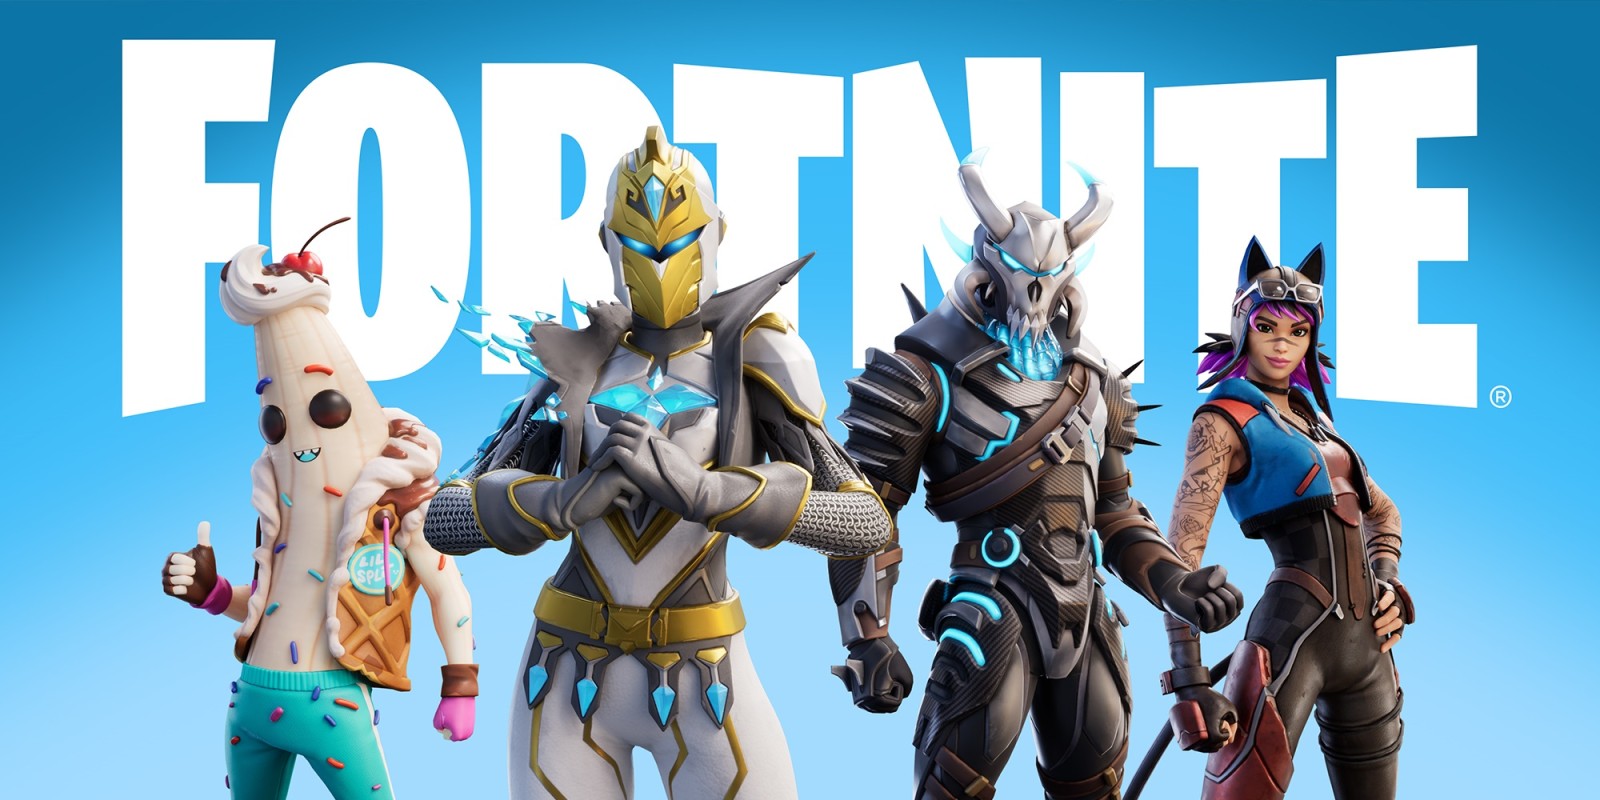 Top 5 Games Like Fortnite to Play in 2023